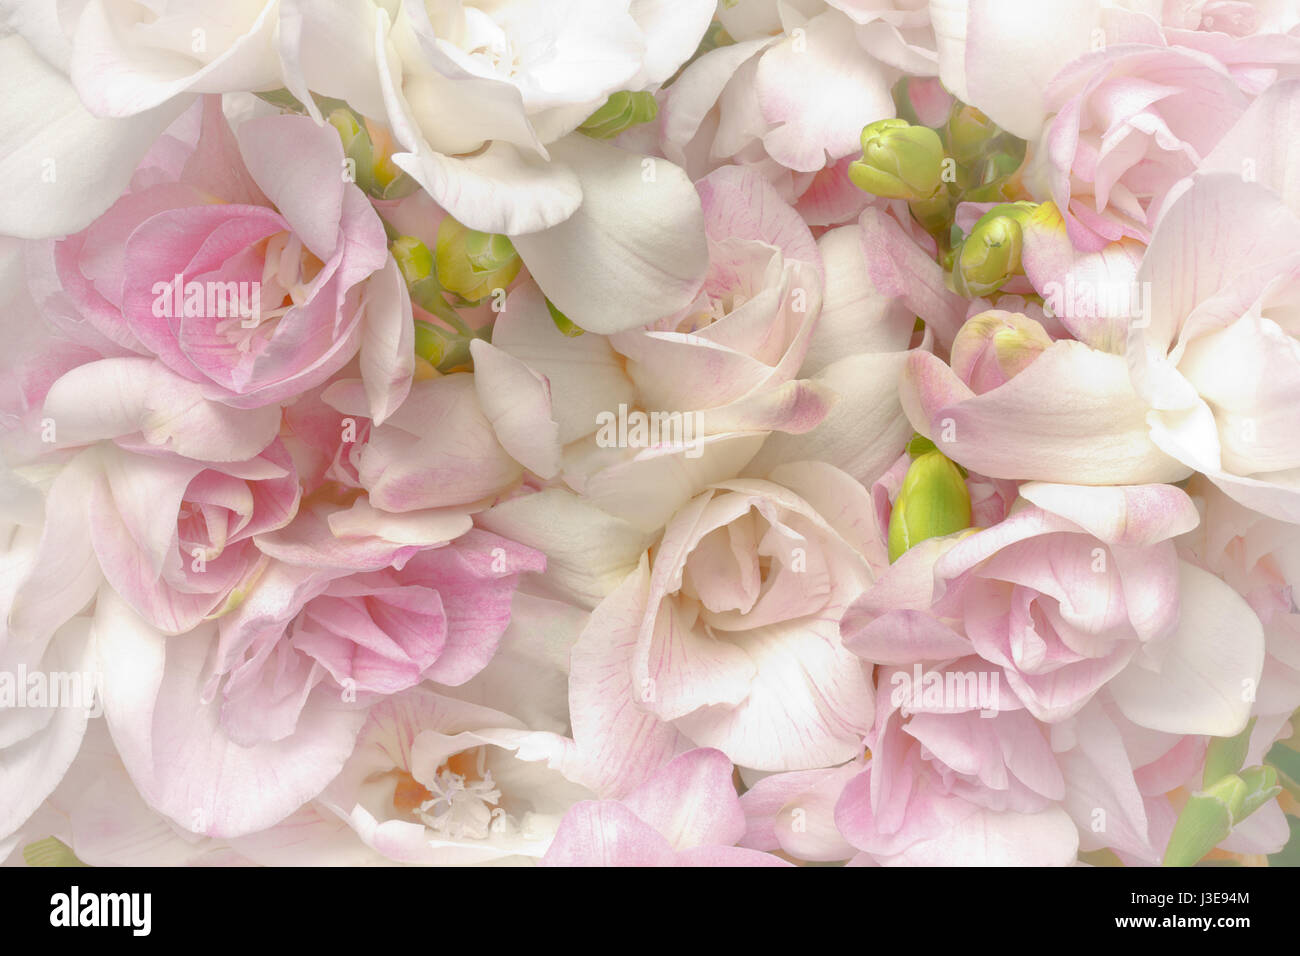 Lots of white and pink freesia flowers and green buds, nostalgic and romantic setting in soft light, highlight vignette, background Stock Photo